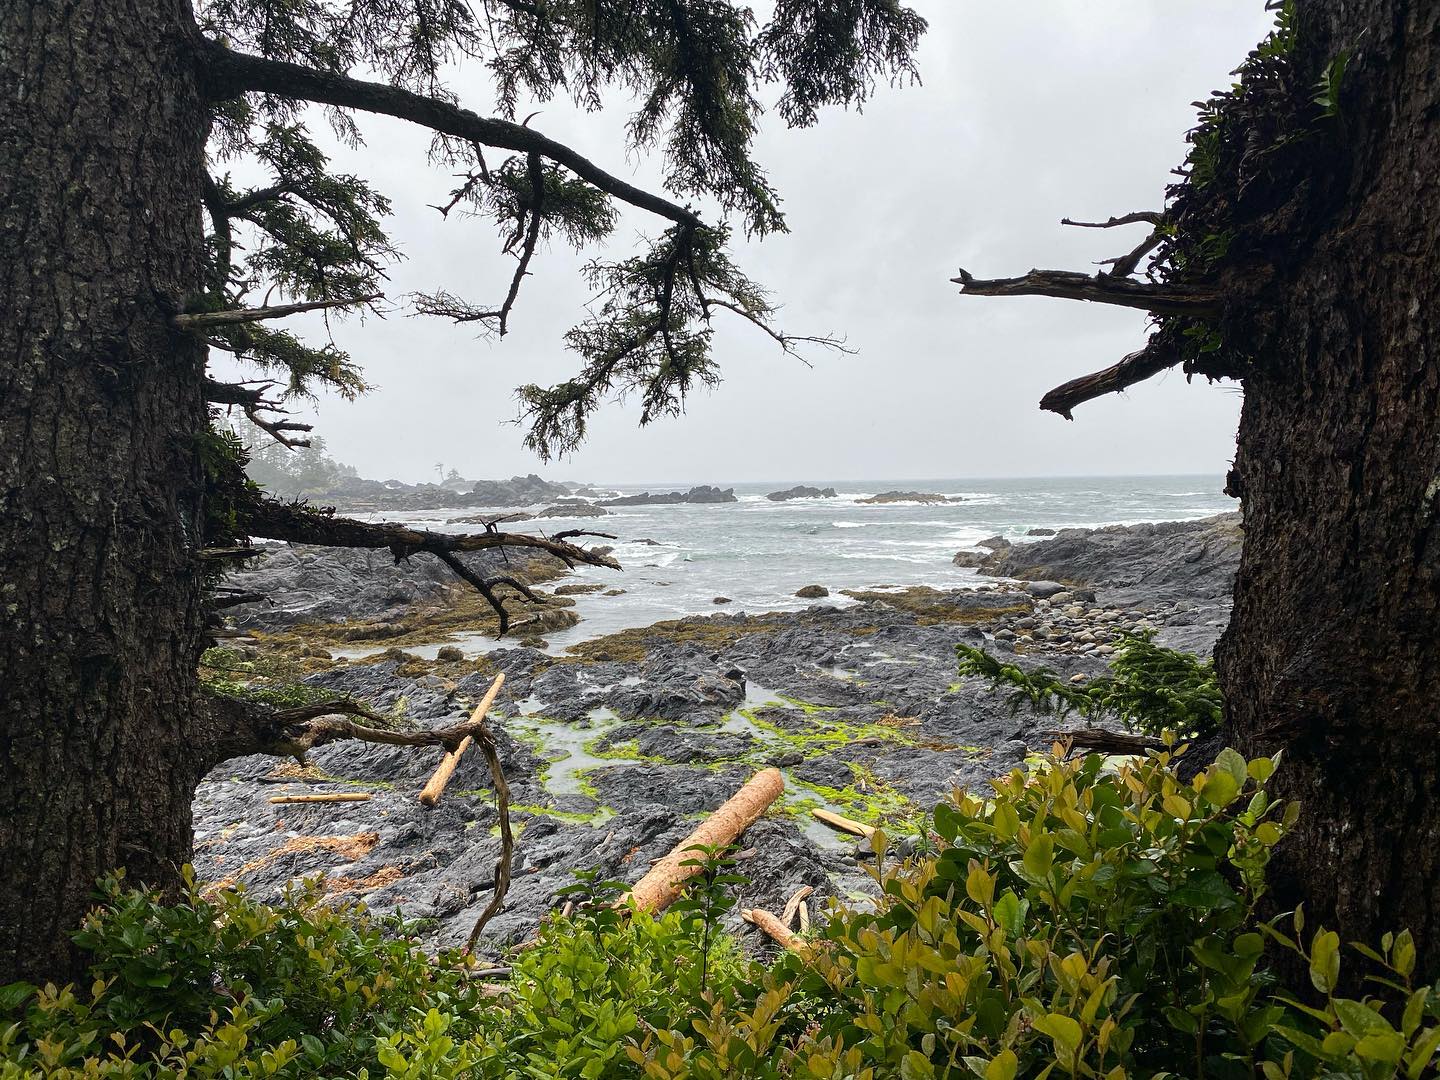 One of a million fabulous views available in #Ucluelet 

#naturephotography #oceanlife #britishcolumbia